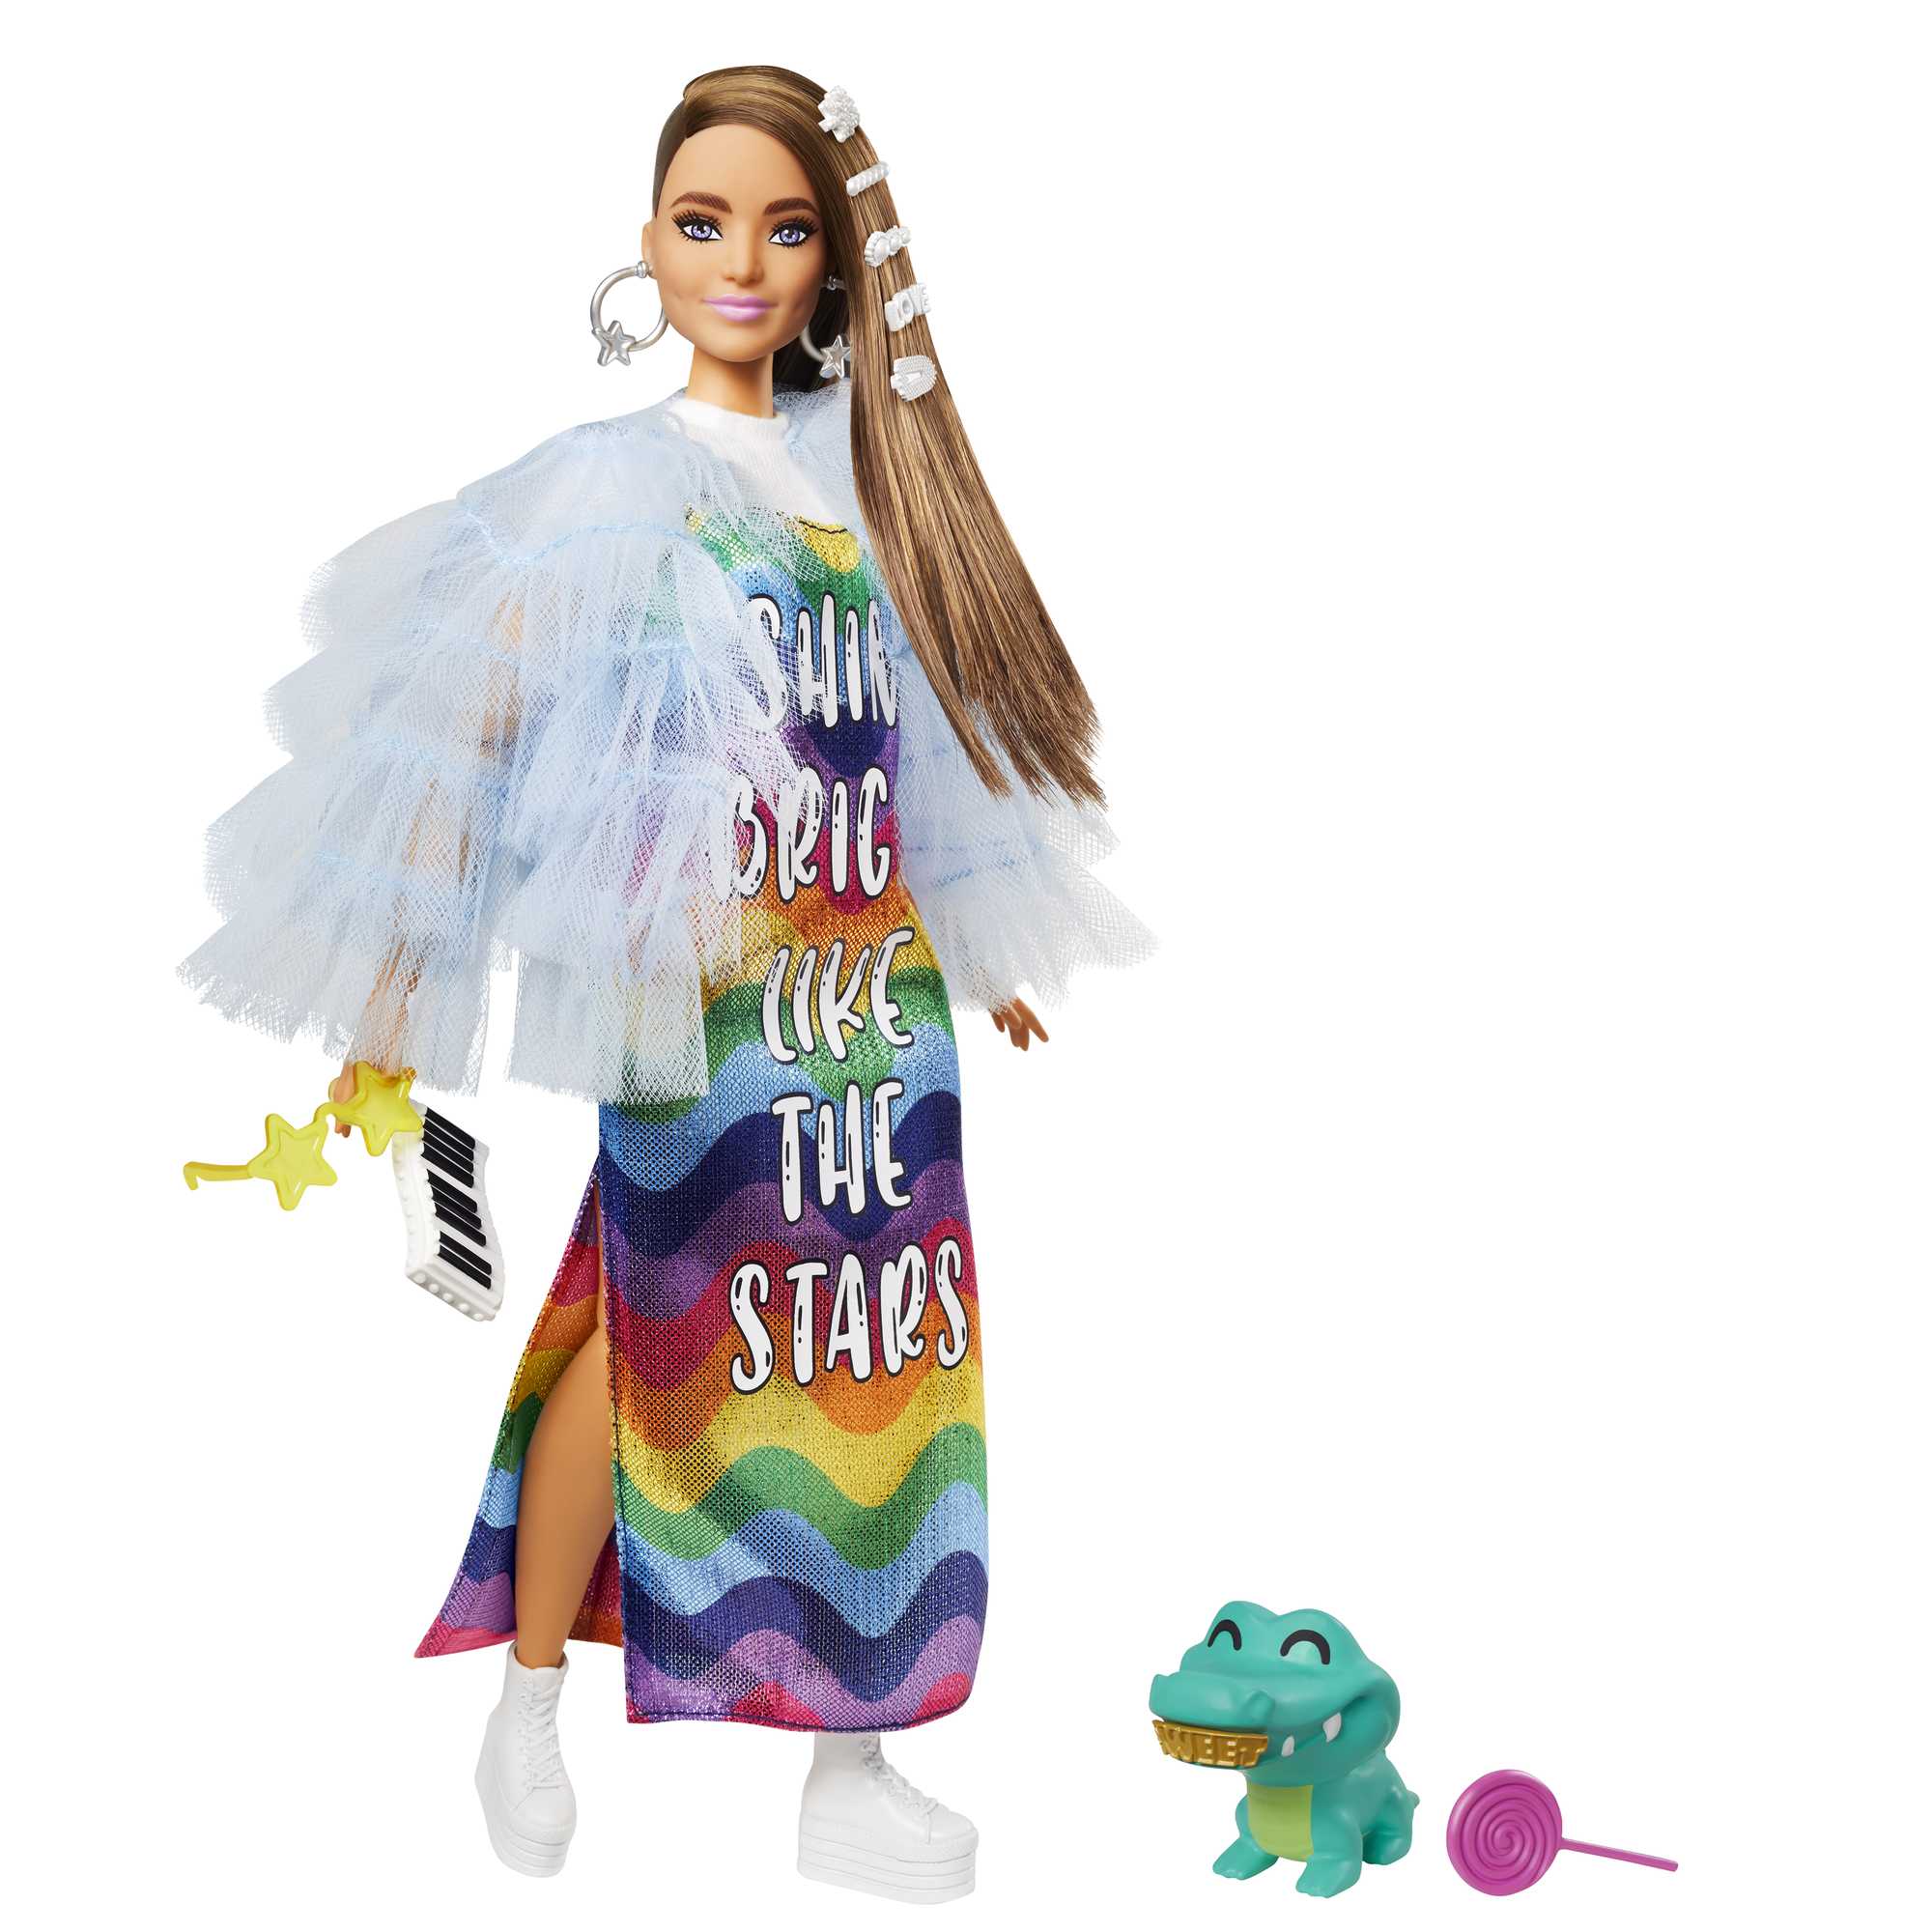 Barbie Clothes, Rocker-Themed Fashion and Accessory 2-Pack for Barbie Dolls